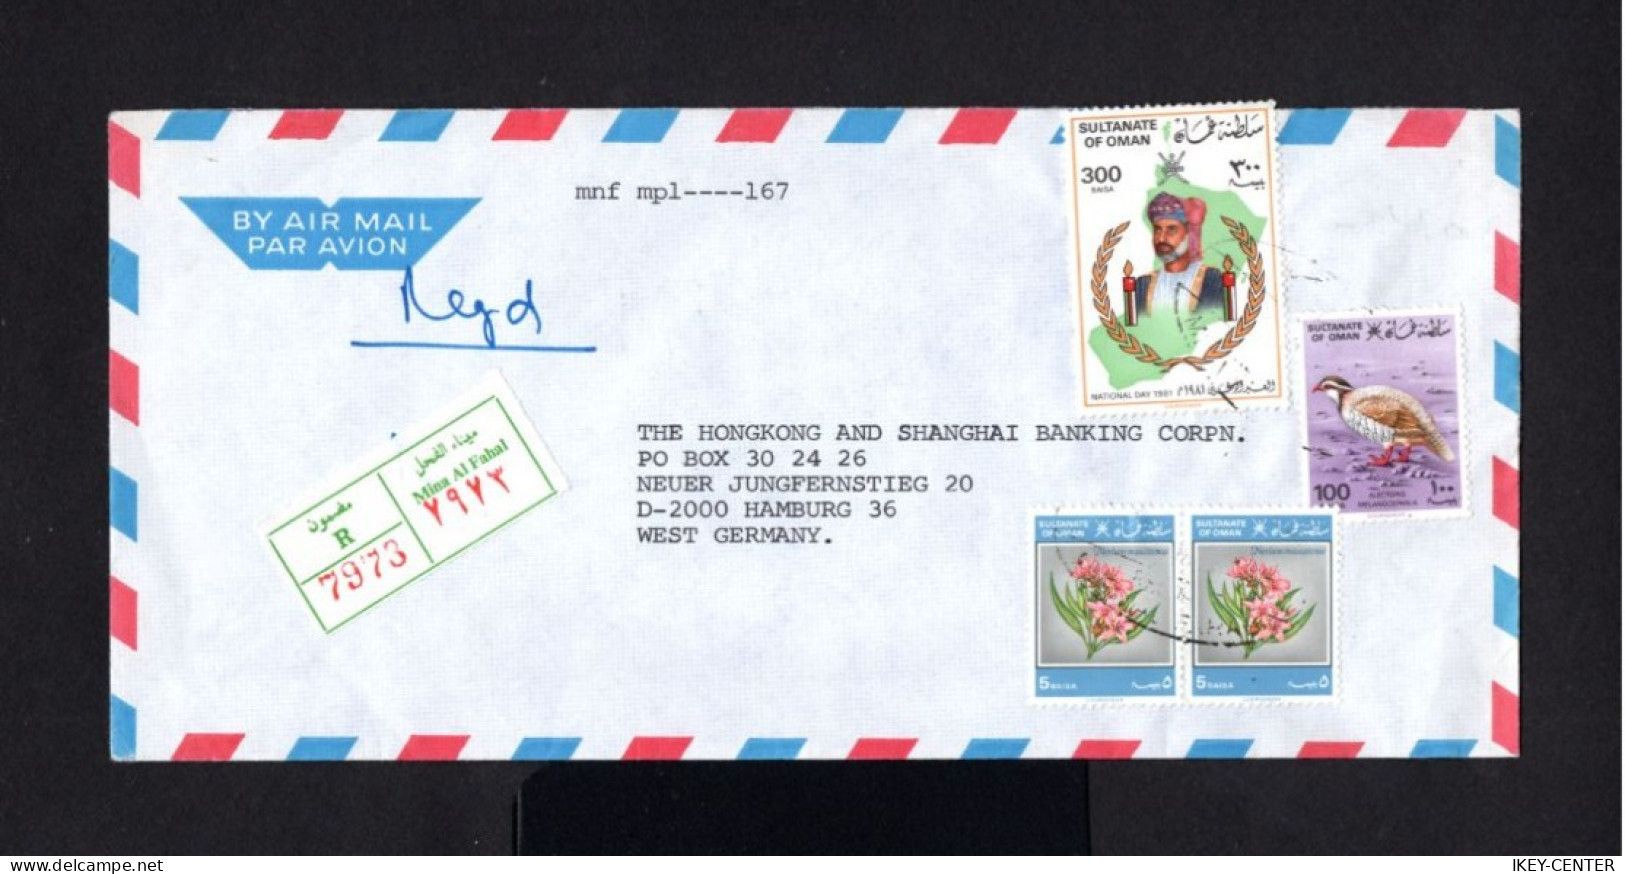 51-STATE Of OMAN-AIRMAIL REGISTERED COVER MINA AL FAHAL To HAMBURG (germany) 1981.Enveloppe RECOMMANDEE - Omán